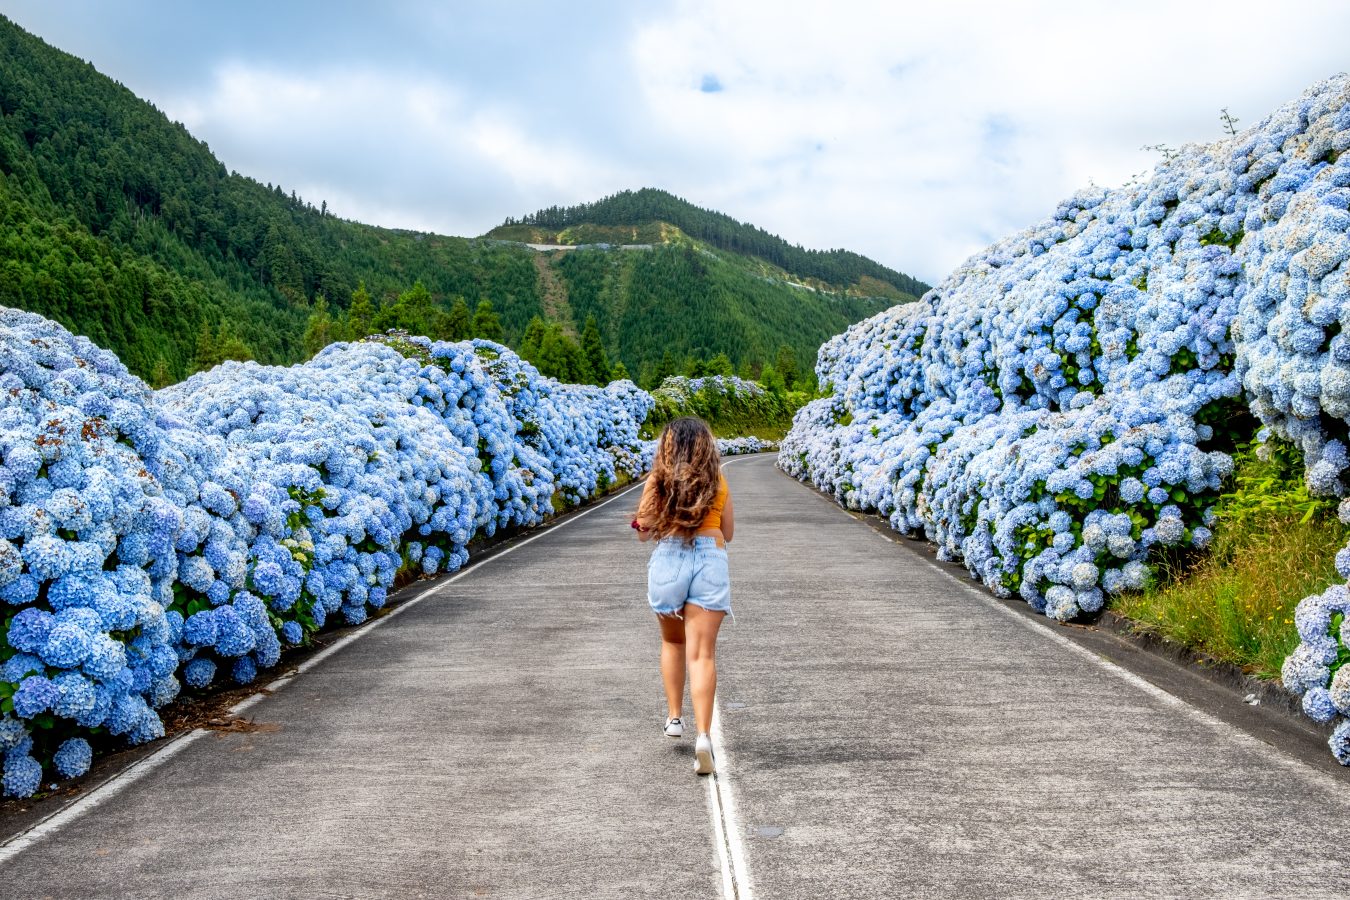 Young woman runs on the street in the Azores with blue flower bushes on either side of the road.